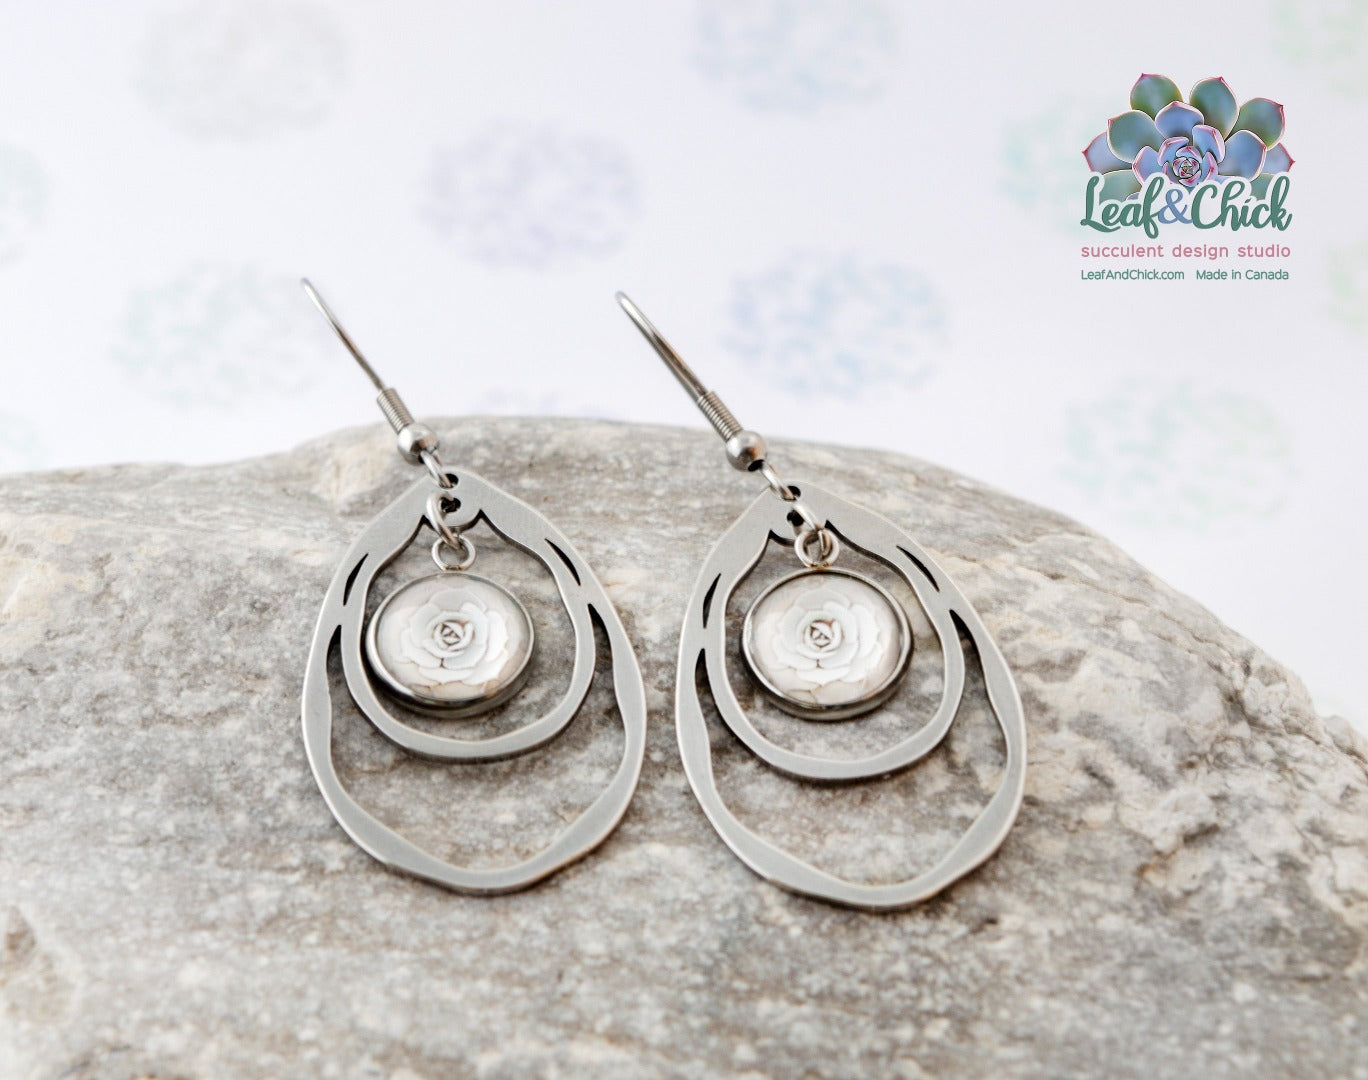 ripple teardrop shaped earrings with succulent art suspended in the middle